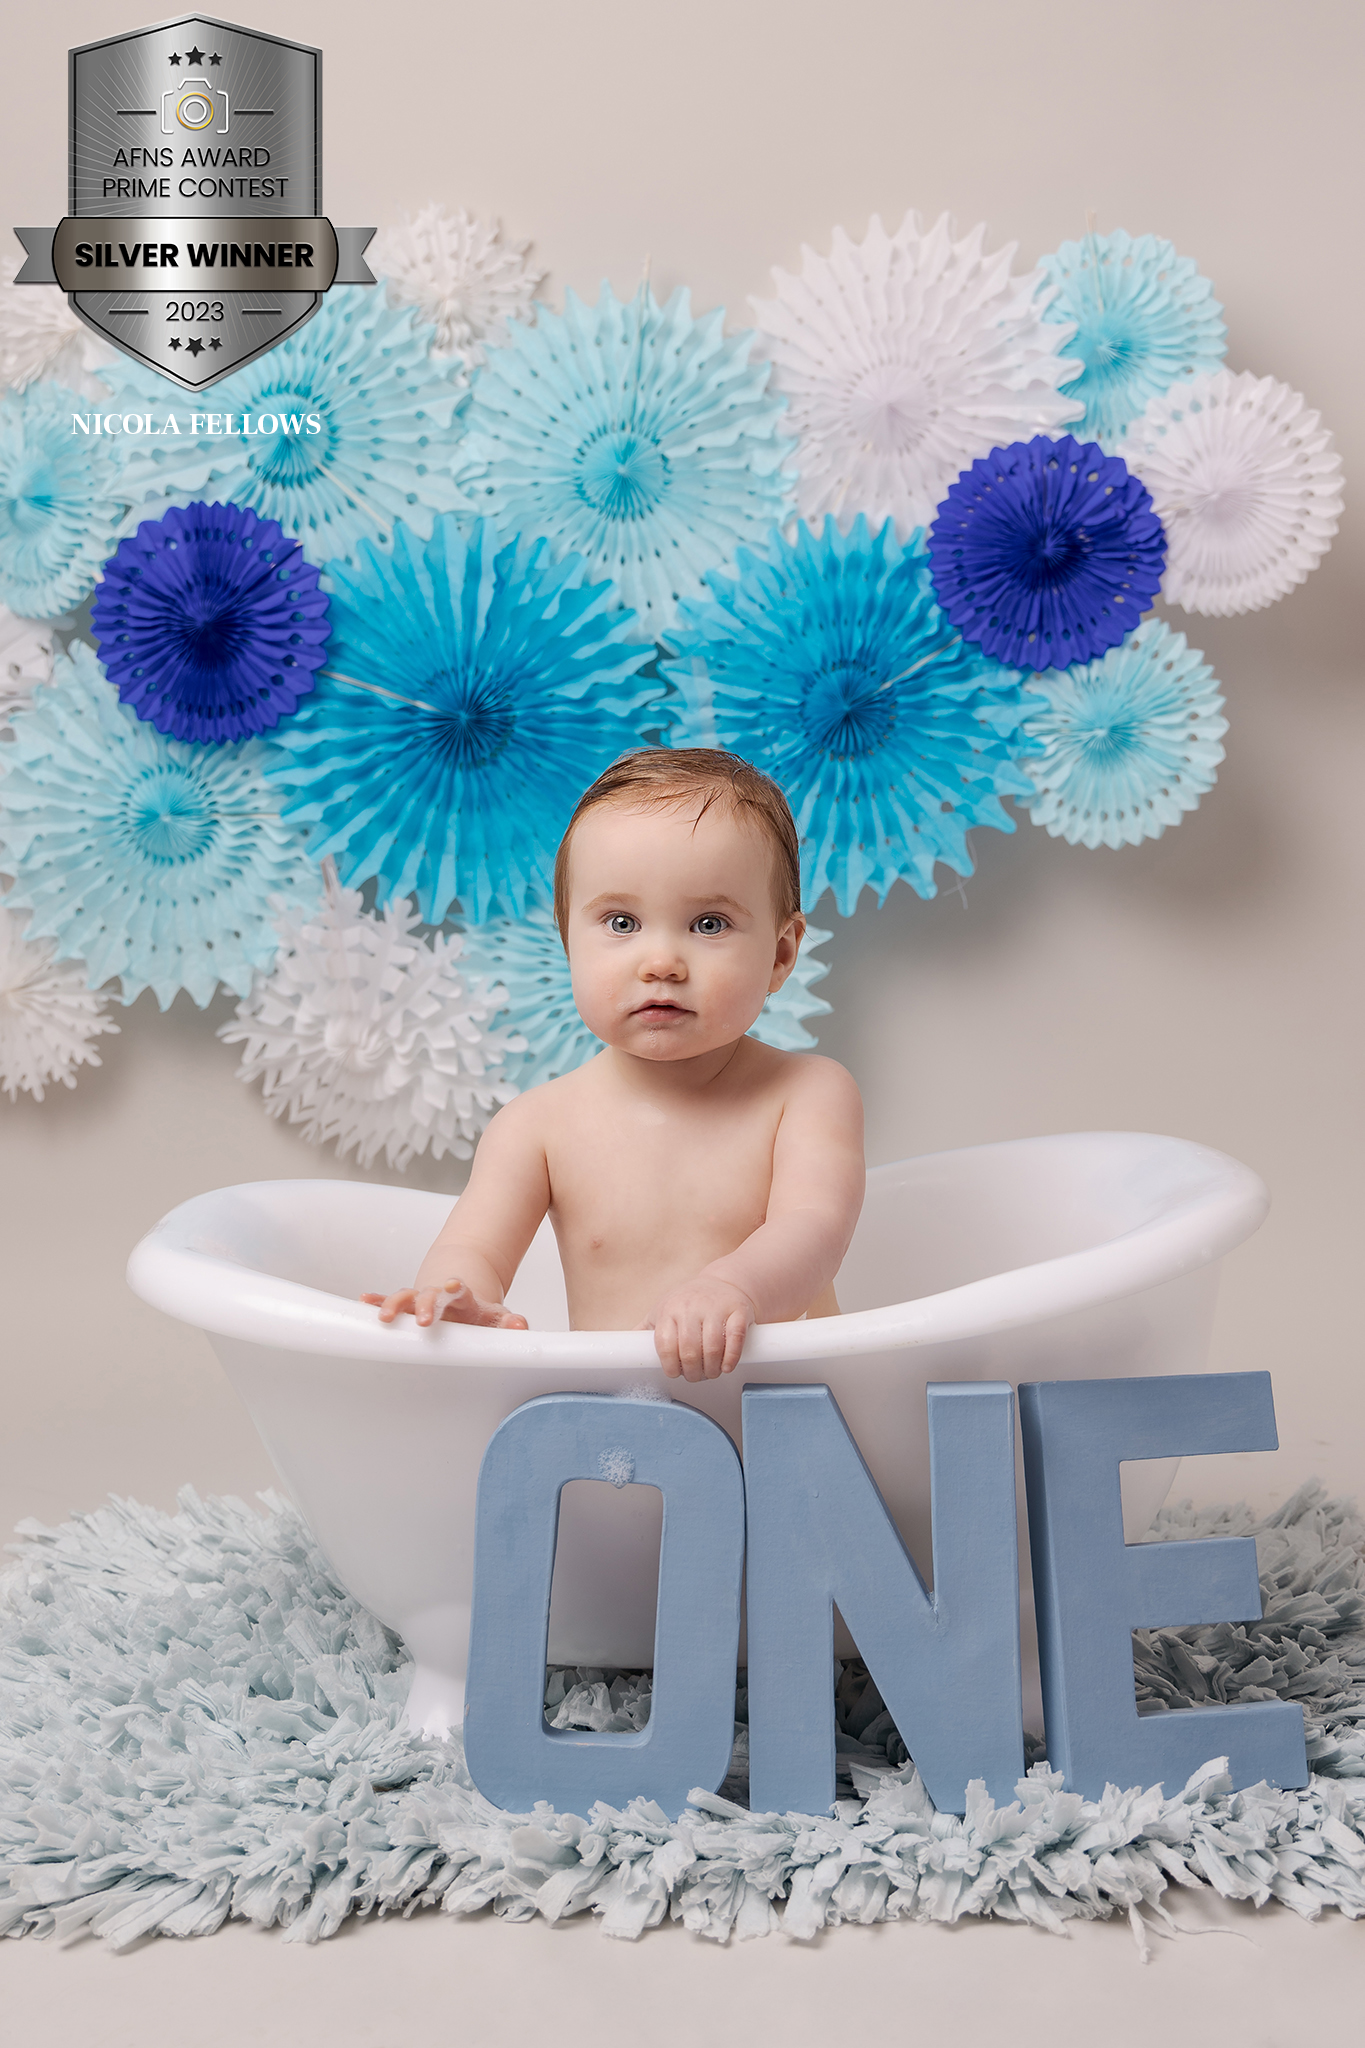 Baby boy turning one celebrating with a cake smash in Sutton Coldfield birmingham, blue themed bubble bath.